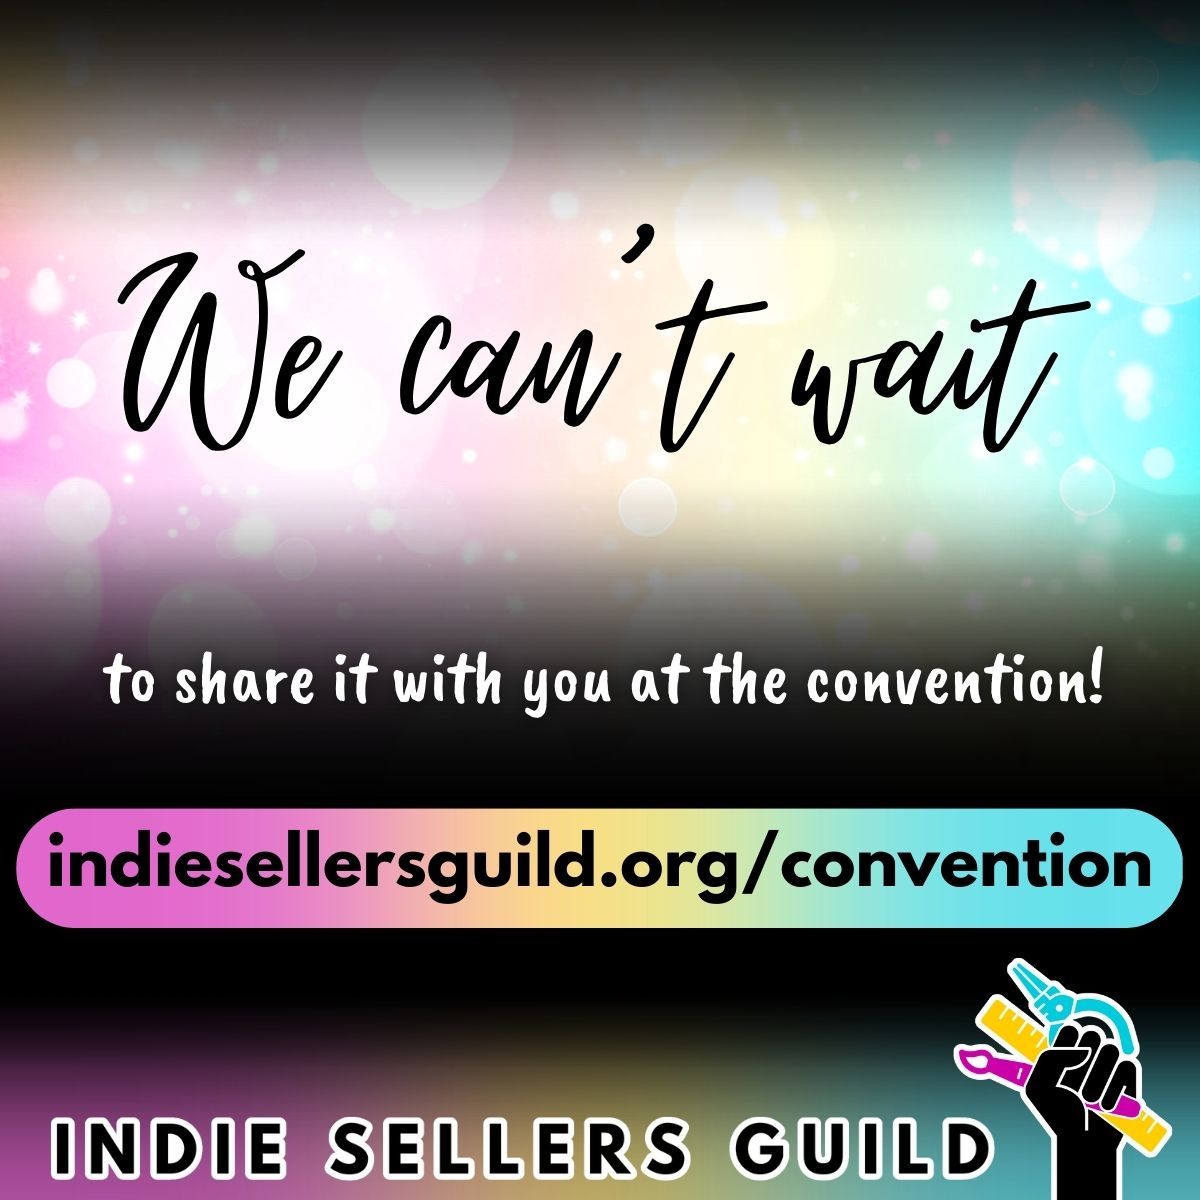 We'll be debuting our EPIC new community website at the convention! buff.ly/3TaqxLE #supportsmallbusiness #unacms #unaio #opensource #alternativesocialmedia #makermovement #shopindie #ISGconvention